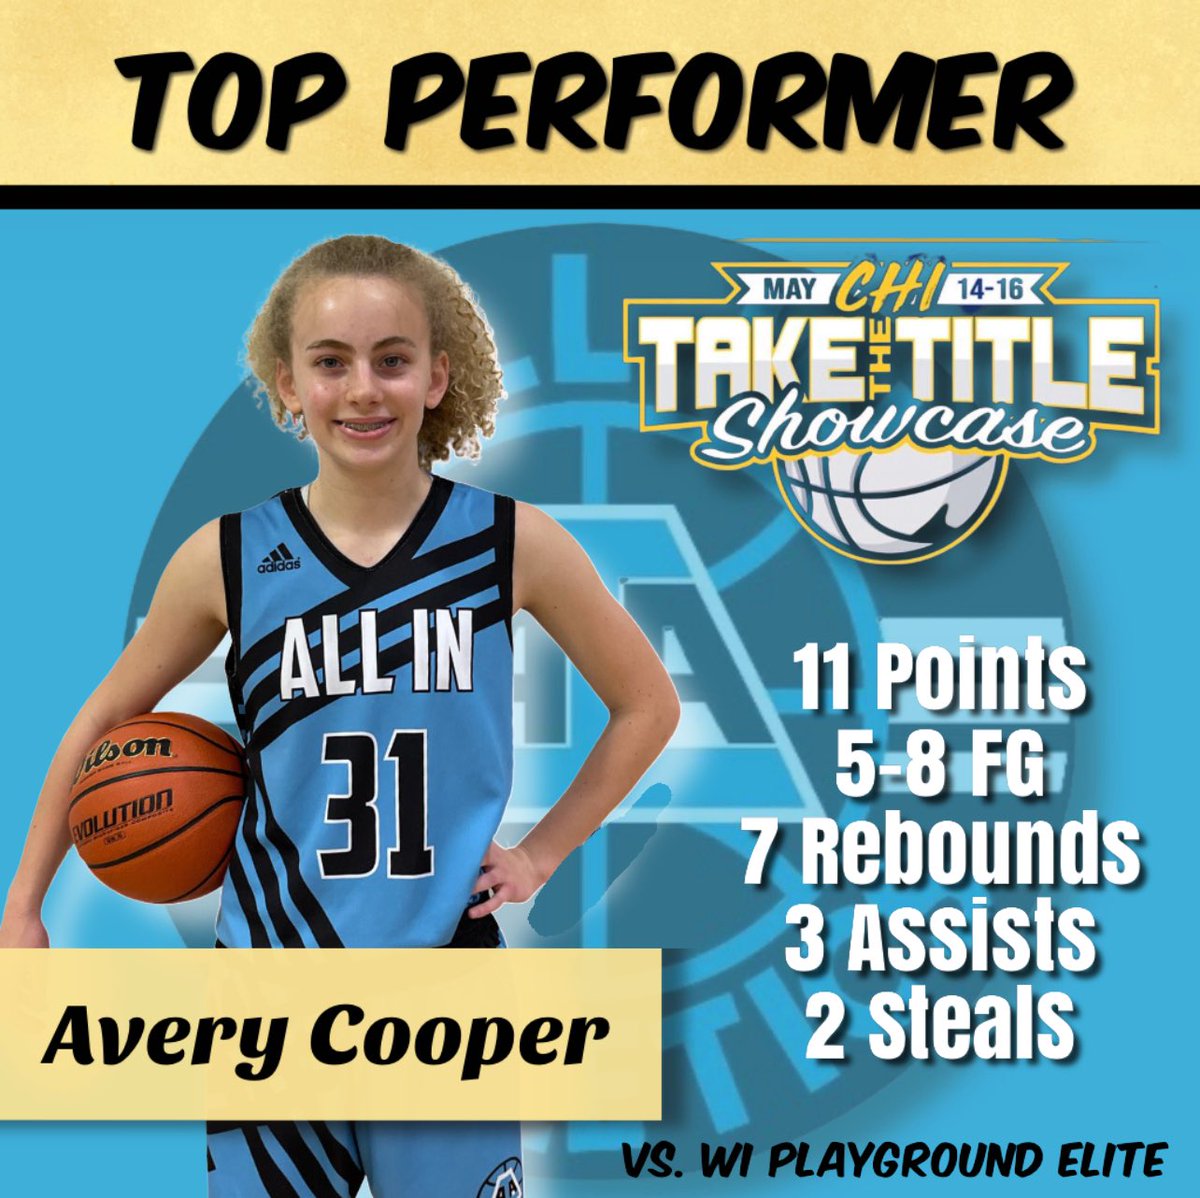 Top performer @averycoop10 of @lzgirlsbball has been dominating all season playing two years up on our 16U Gold Gauntlet team. She lead us to a 3-1 record last weekend at the @jrallstarevents Take The Title Showcase!